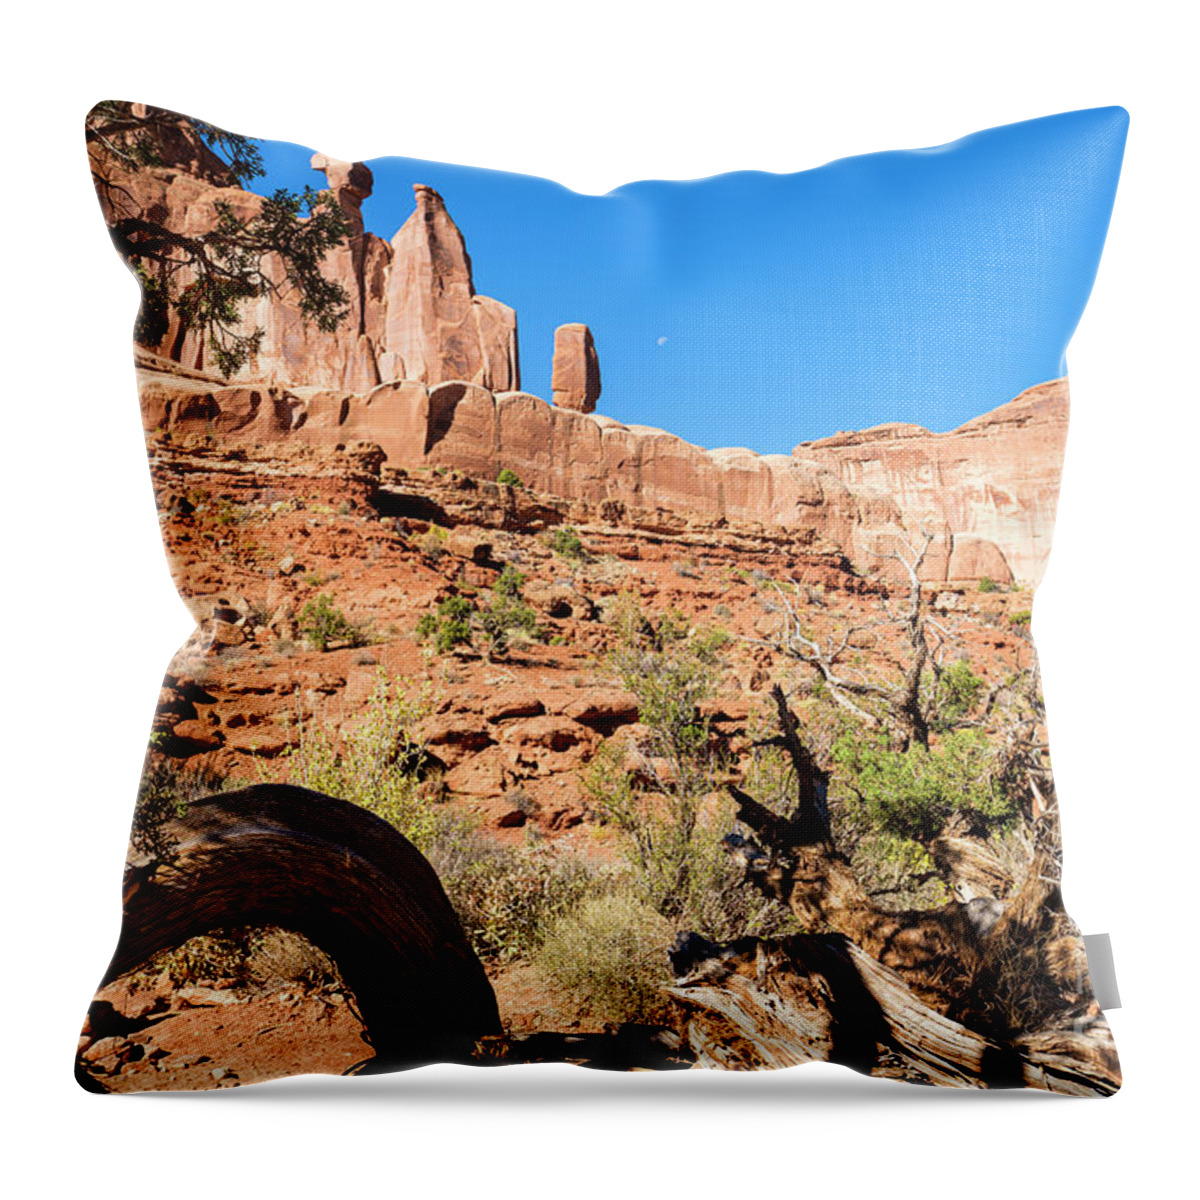 Arches National Park Throw Pillow featuring the photograph Arches National Park #41 by Raul Rodriguez